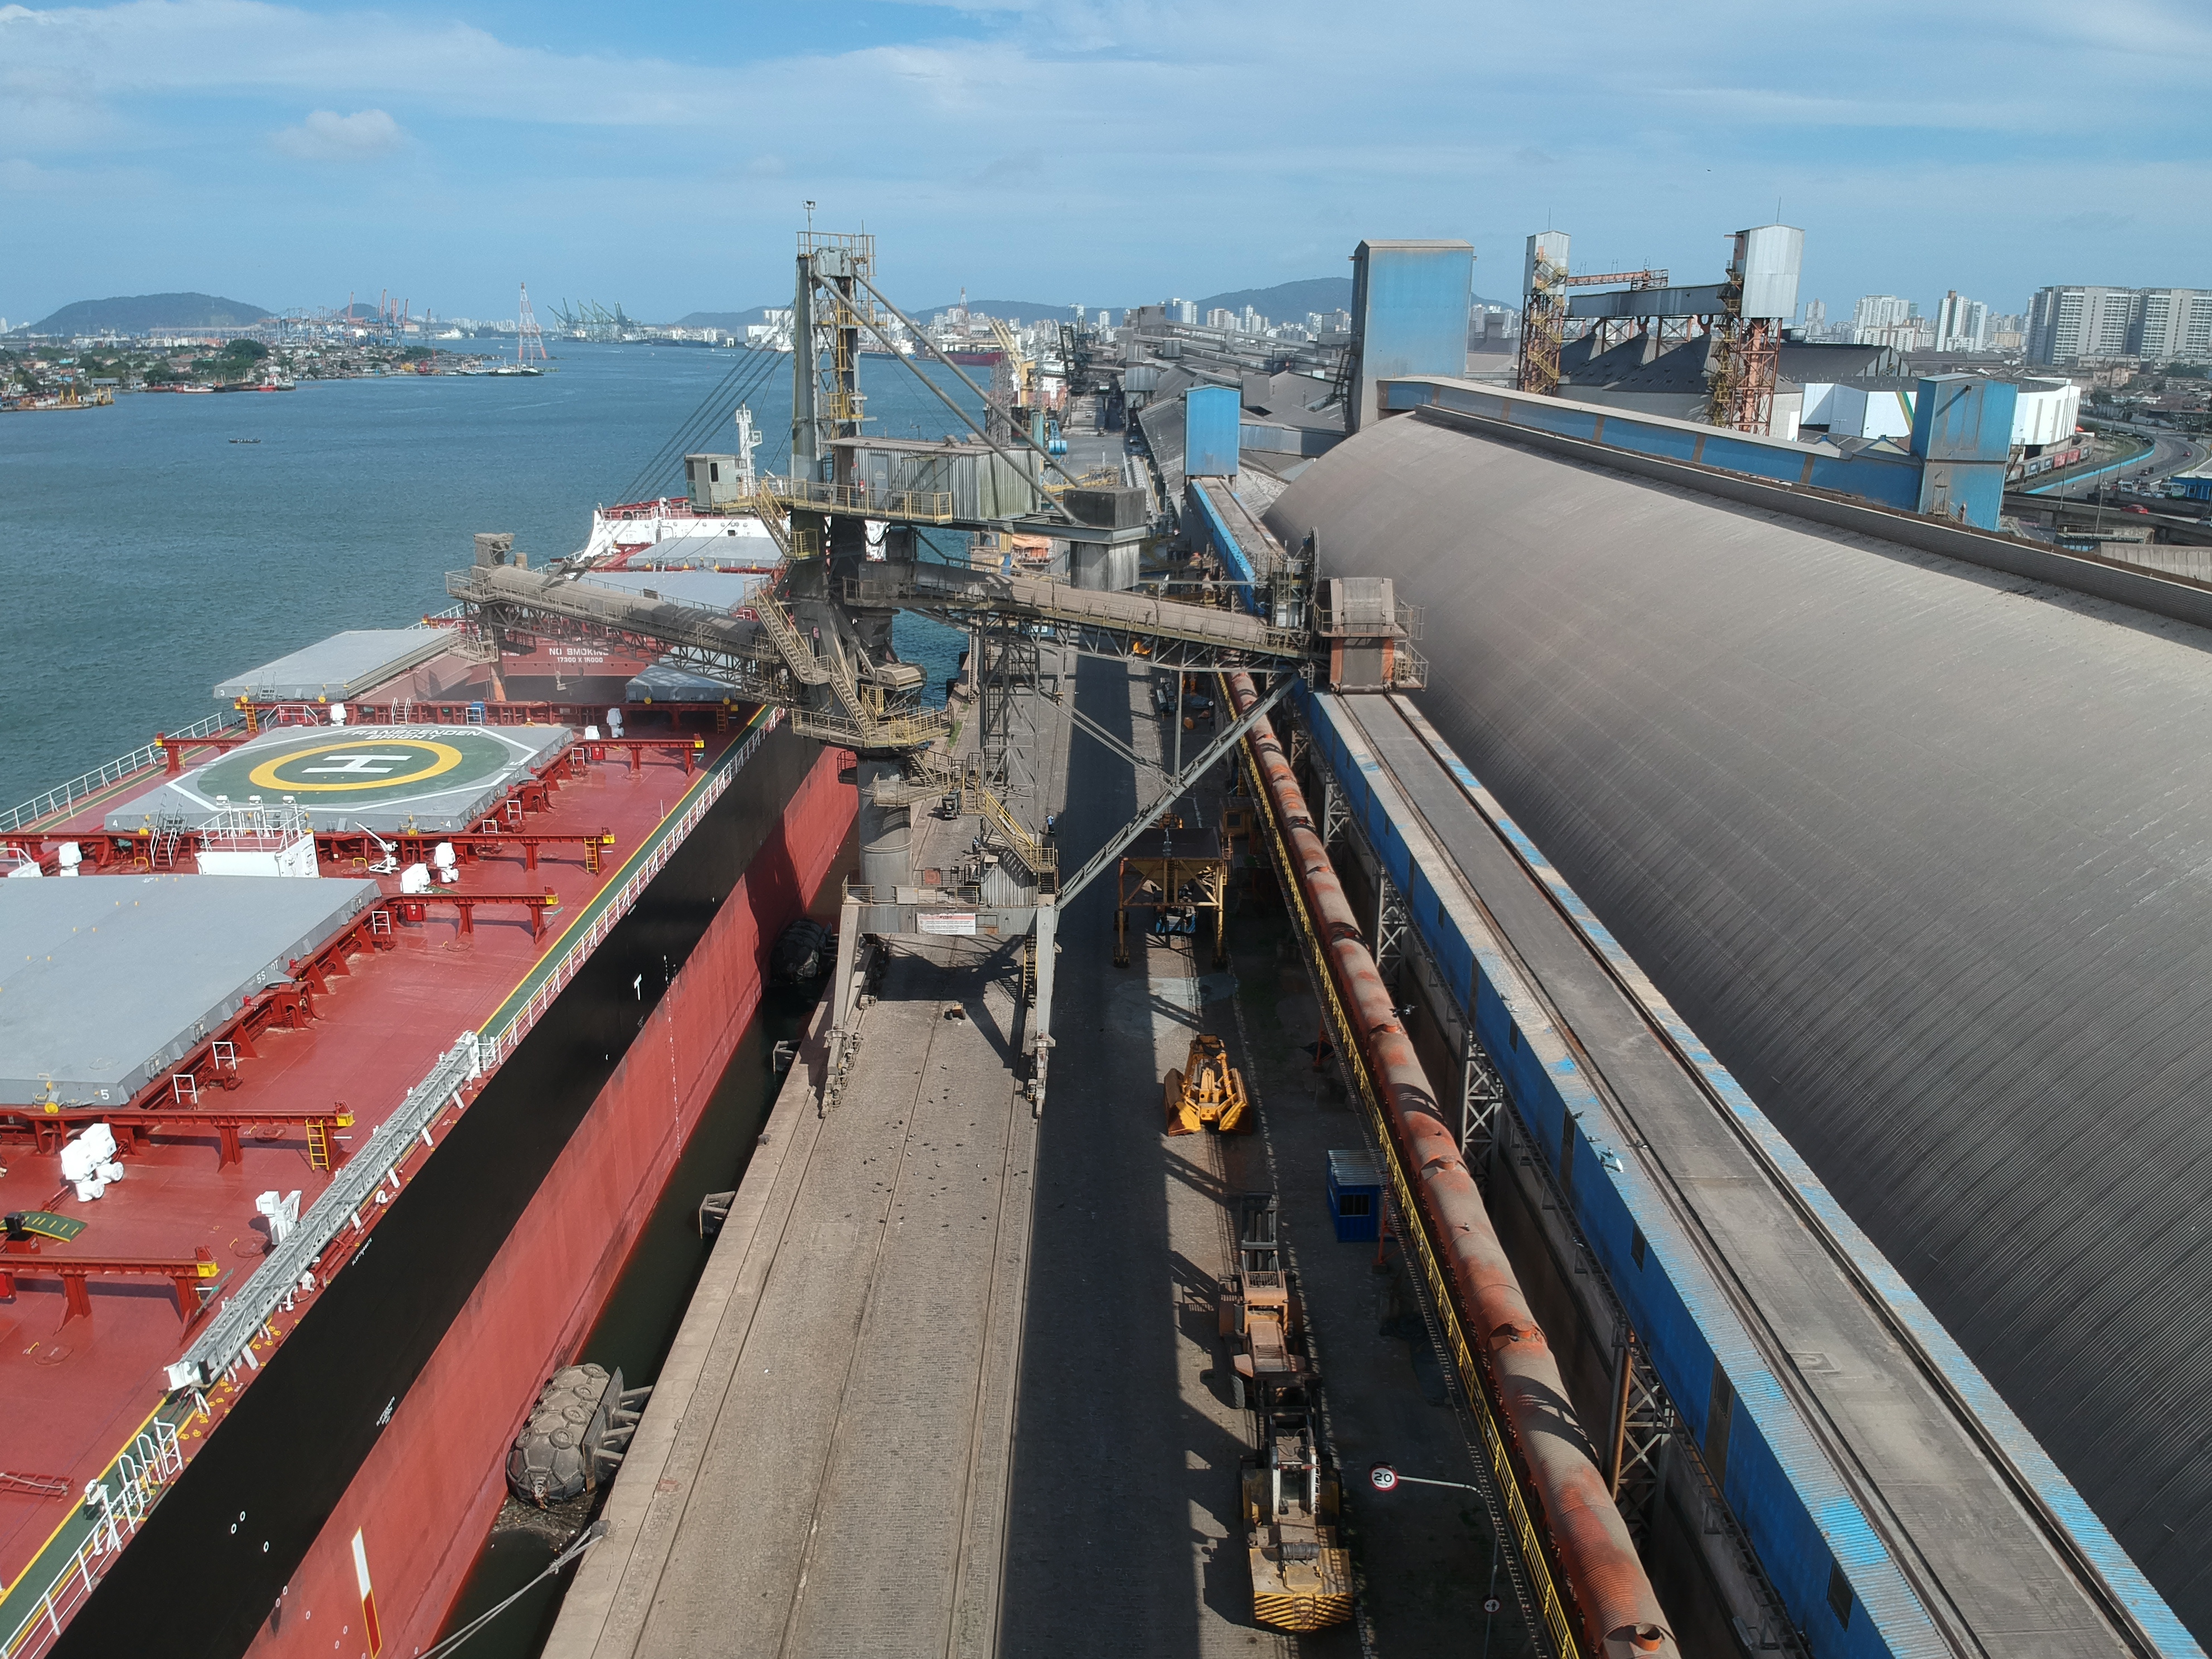 COFCO's Terminal 12A port in Santos. COFCO is one of the top exporters of grains and oilseeds from Brazil and also has significant sugar, coffee and cotton businesses in Brazil. 